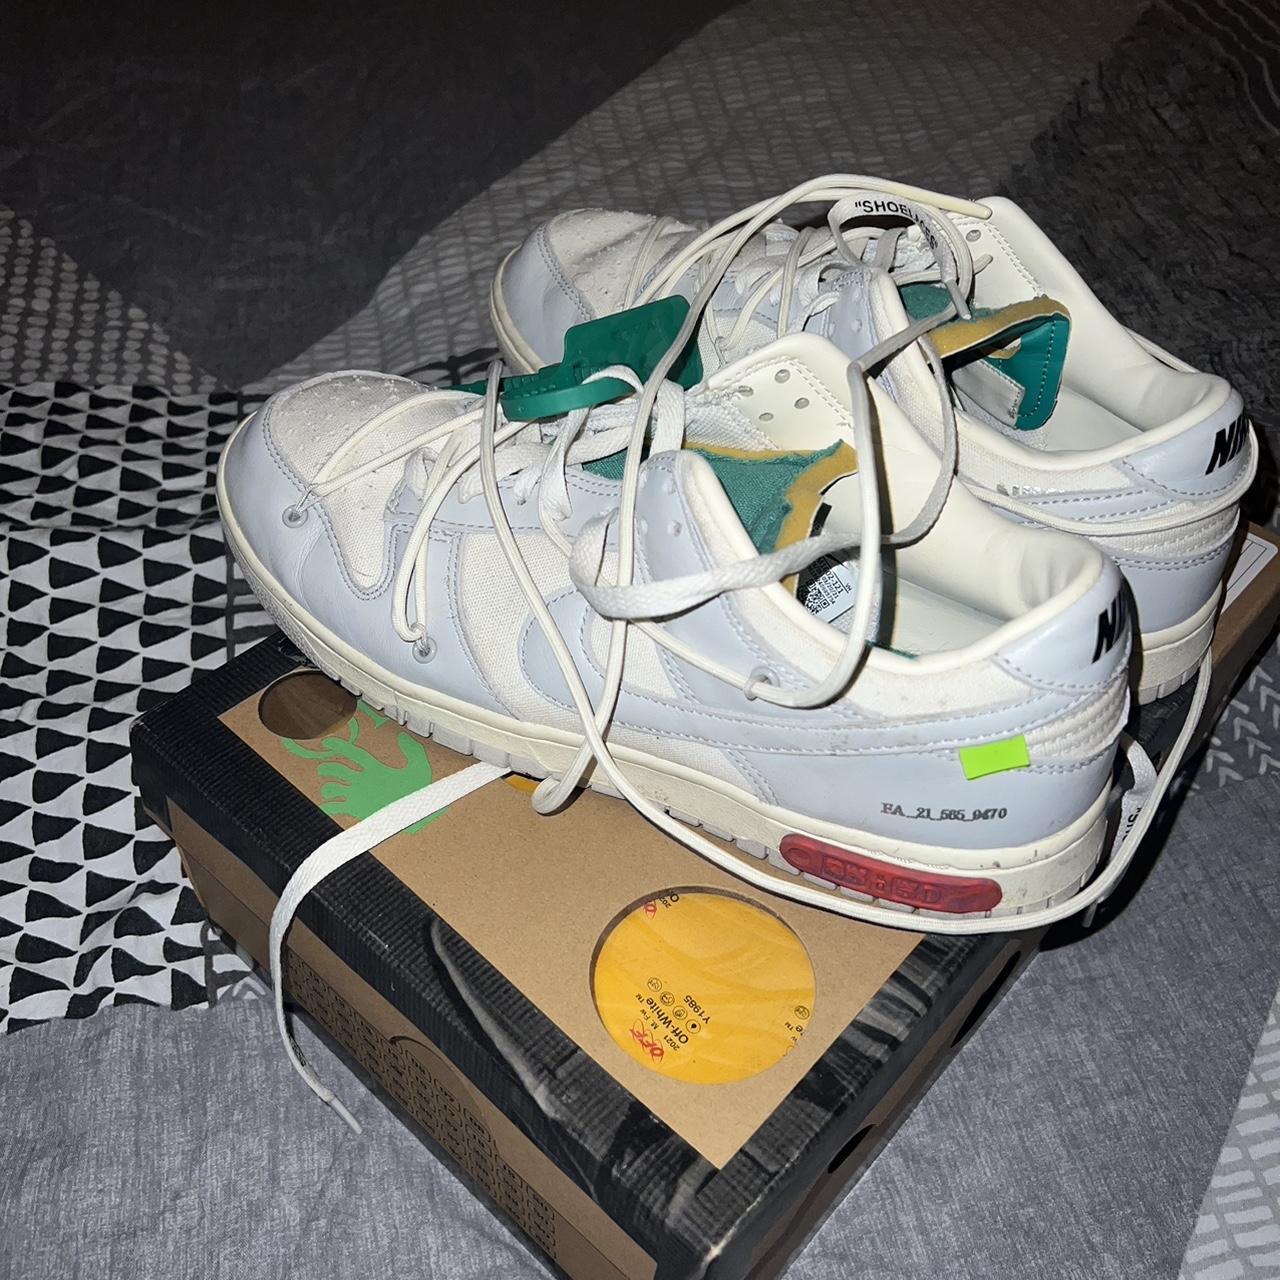 OFF WHITE NIKE DUNK LOT 25 UK SIZE 10 Only worn a... - Depop